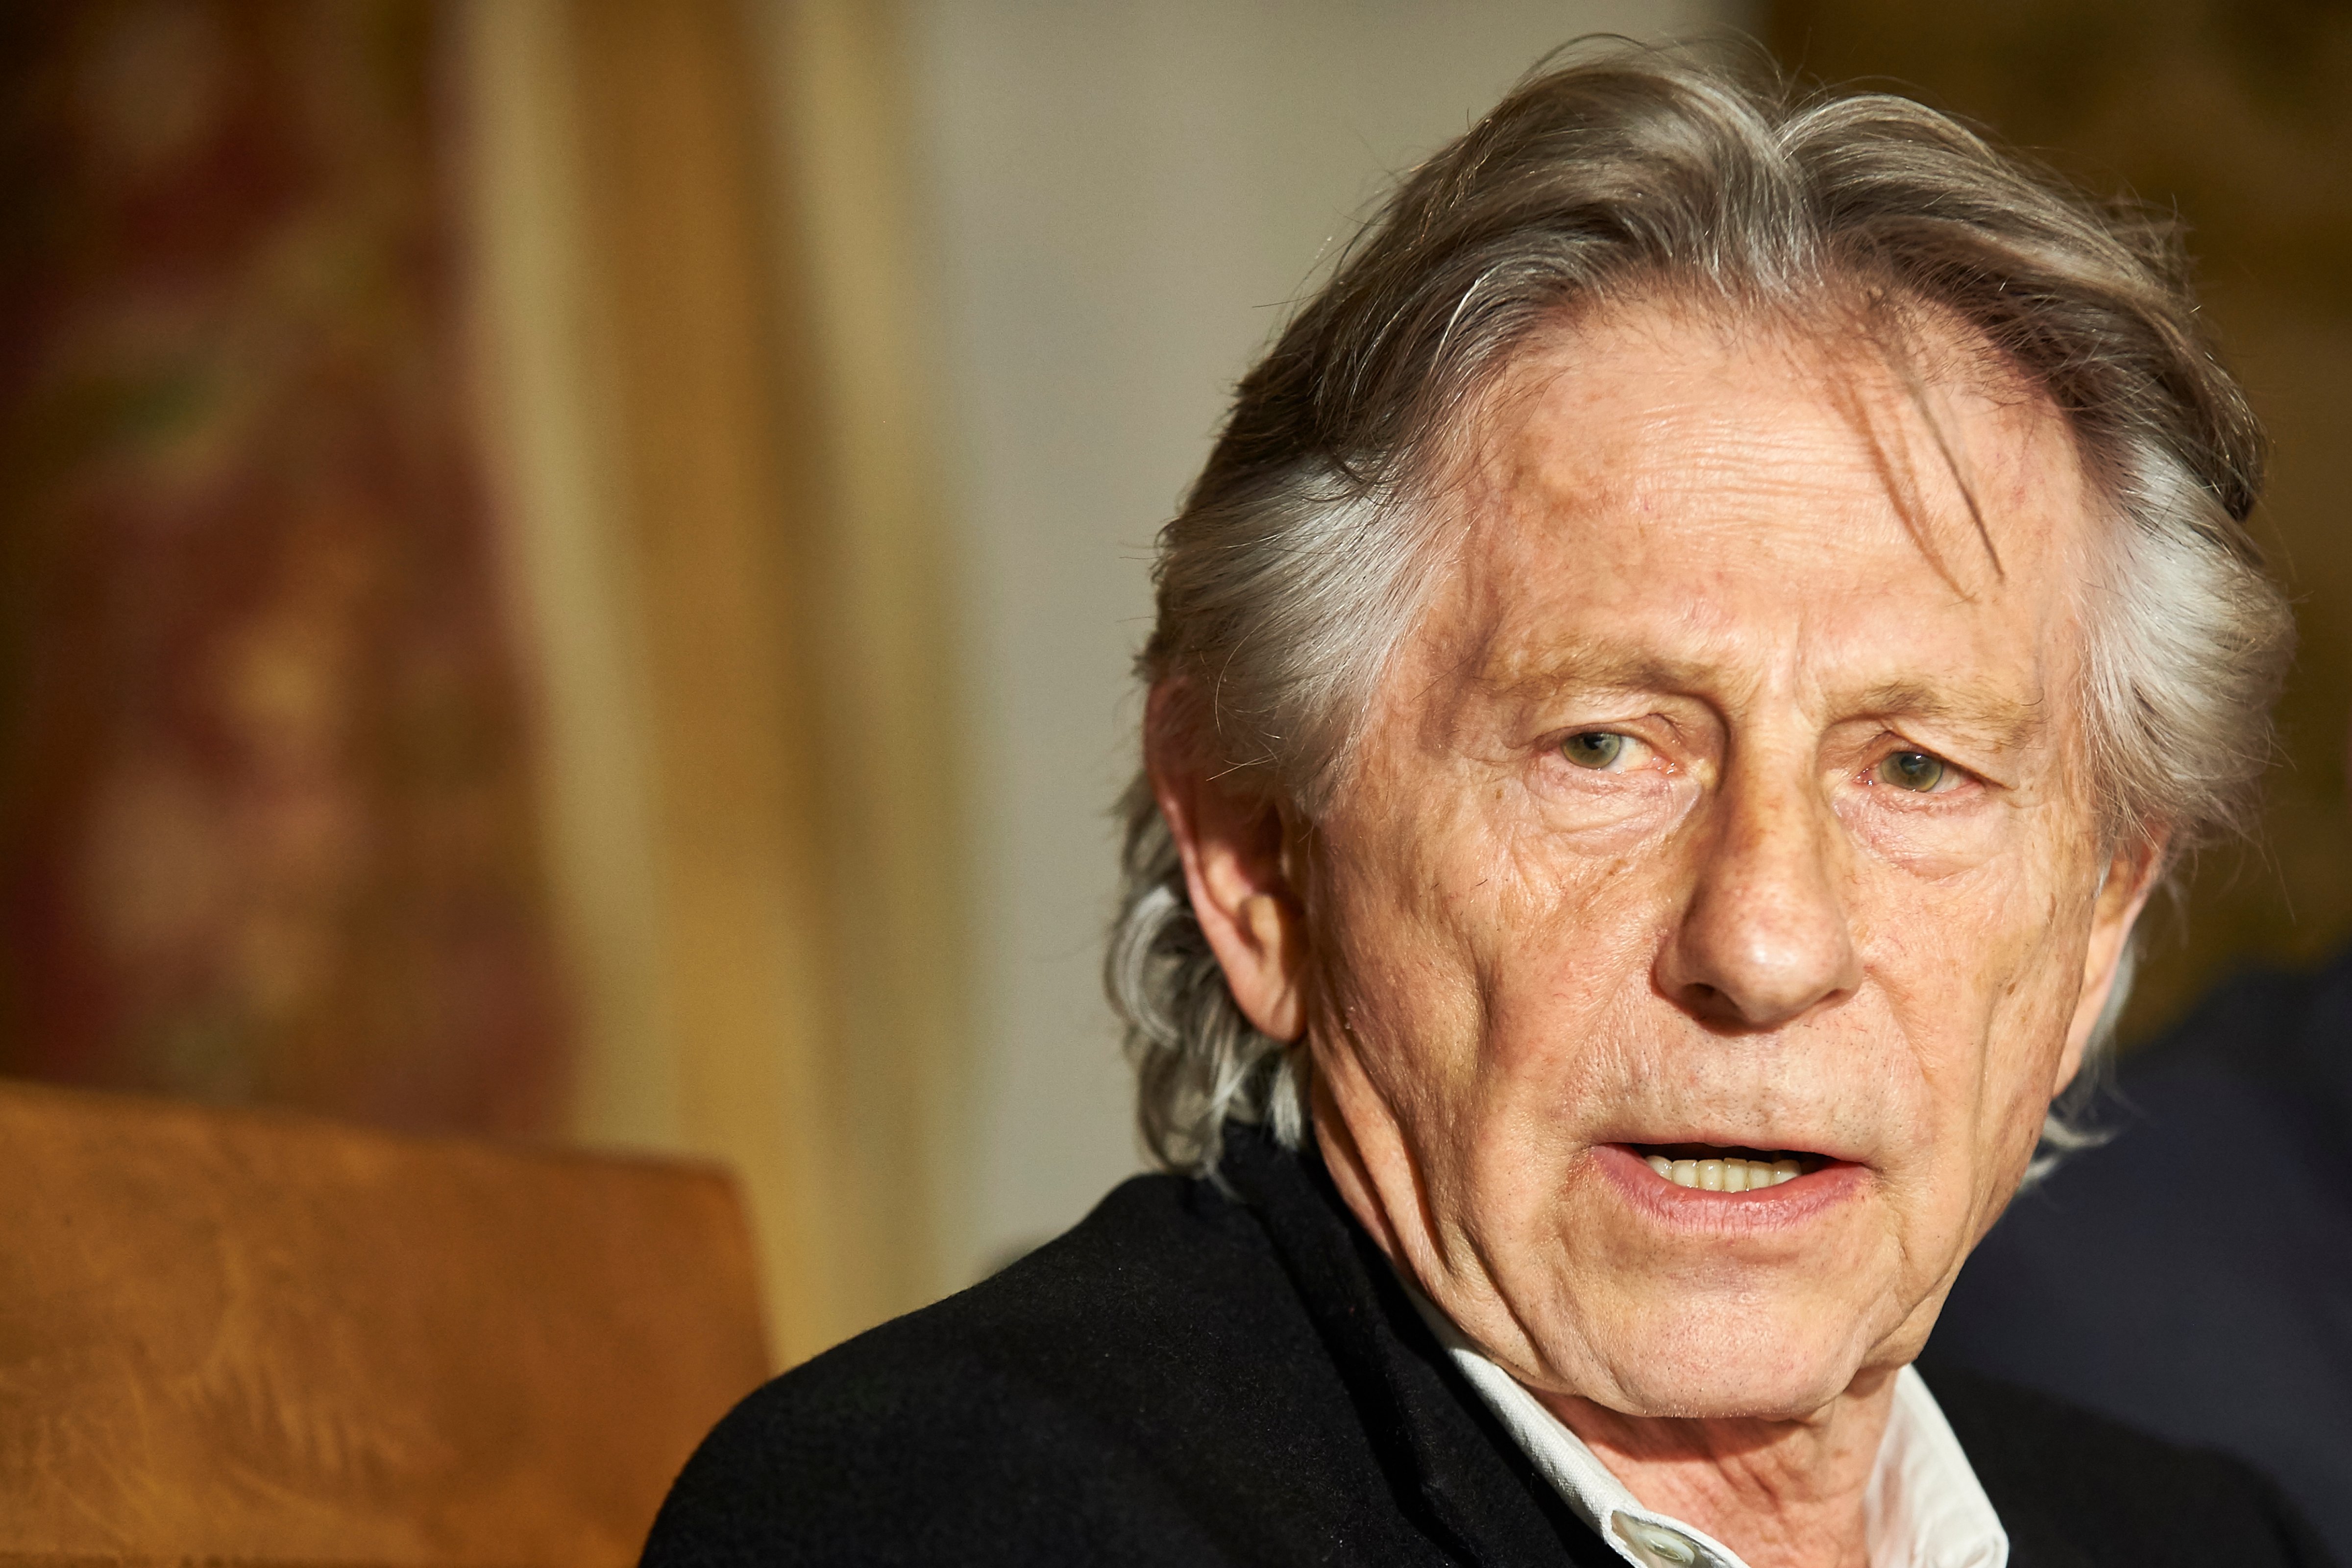 French-Polish film director Roman Polanski arrives to attend a press conference at the Bonarowski Palace Hotel on October 30, 2015 in Krakow, Poland. (Adam Nurkiewicz—Getty Images)